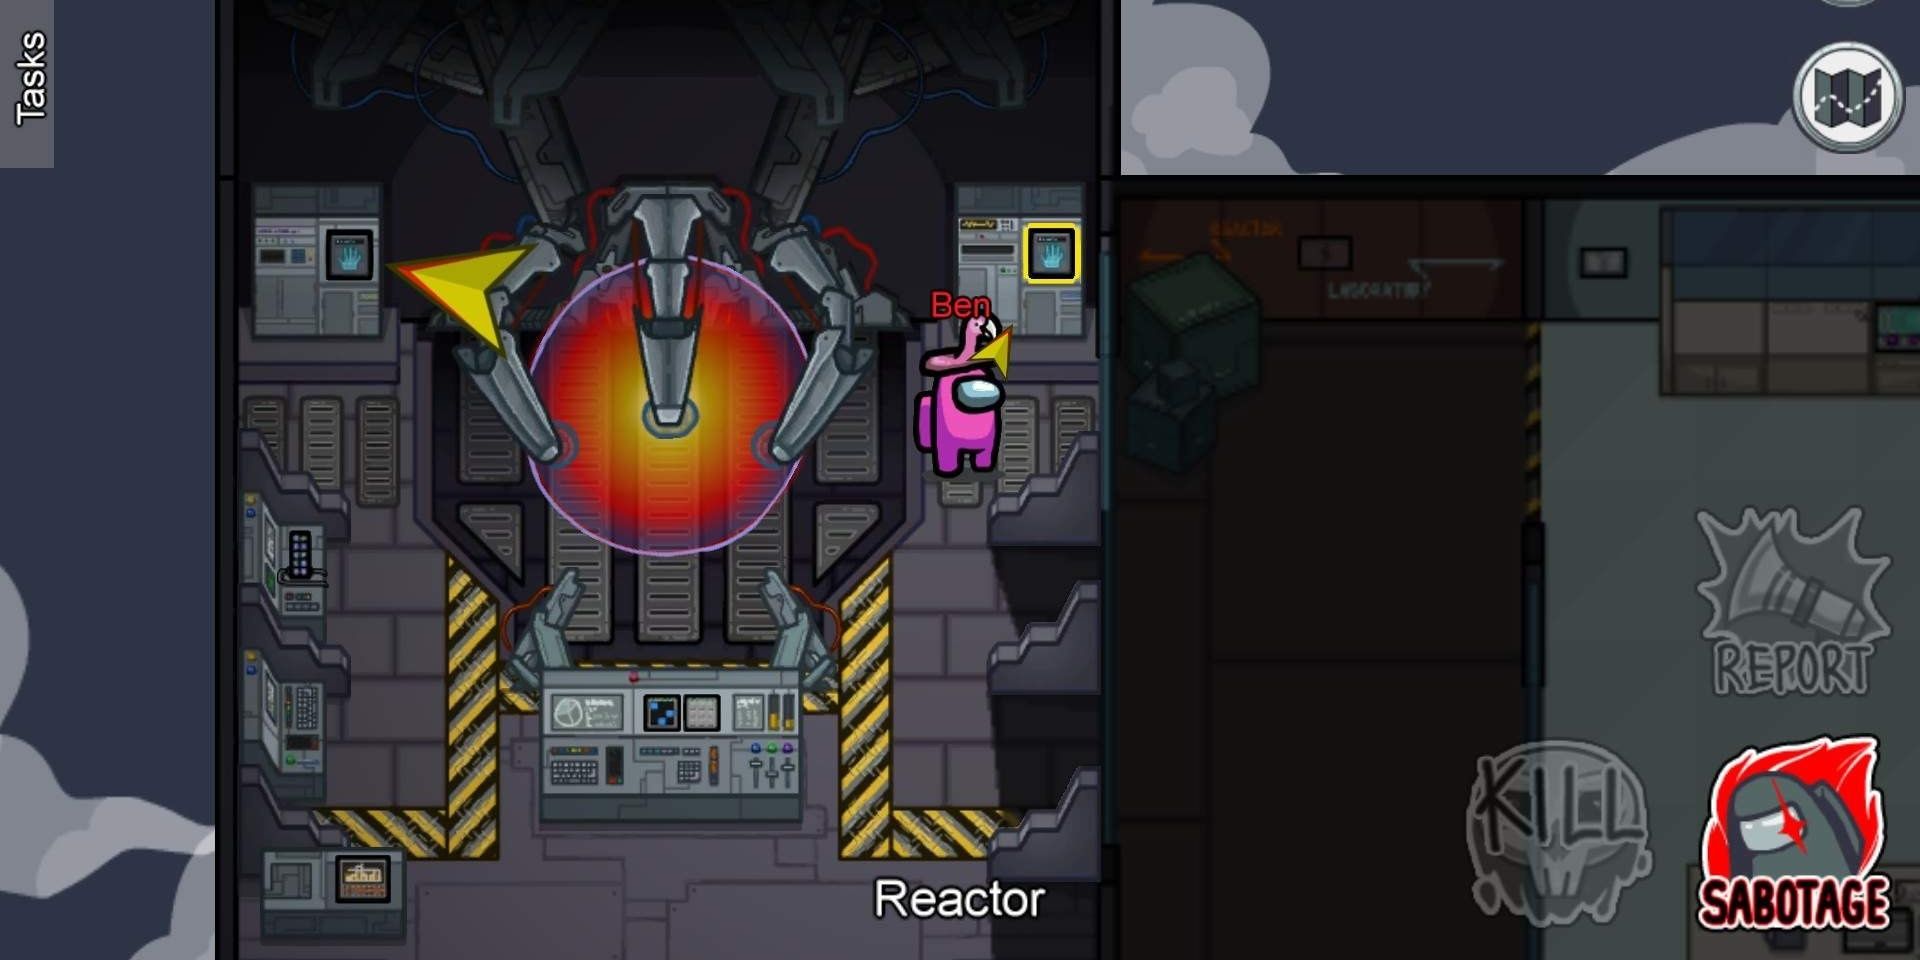 The reactor on Mira HQ in Among Us